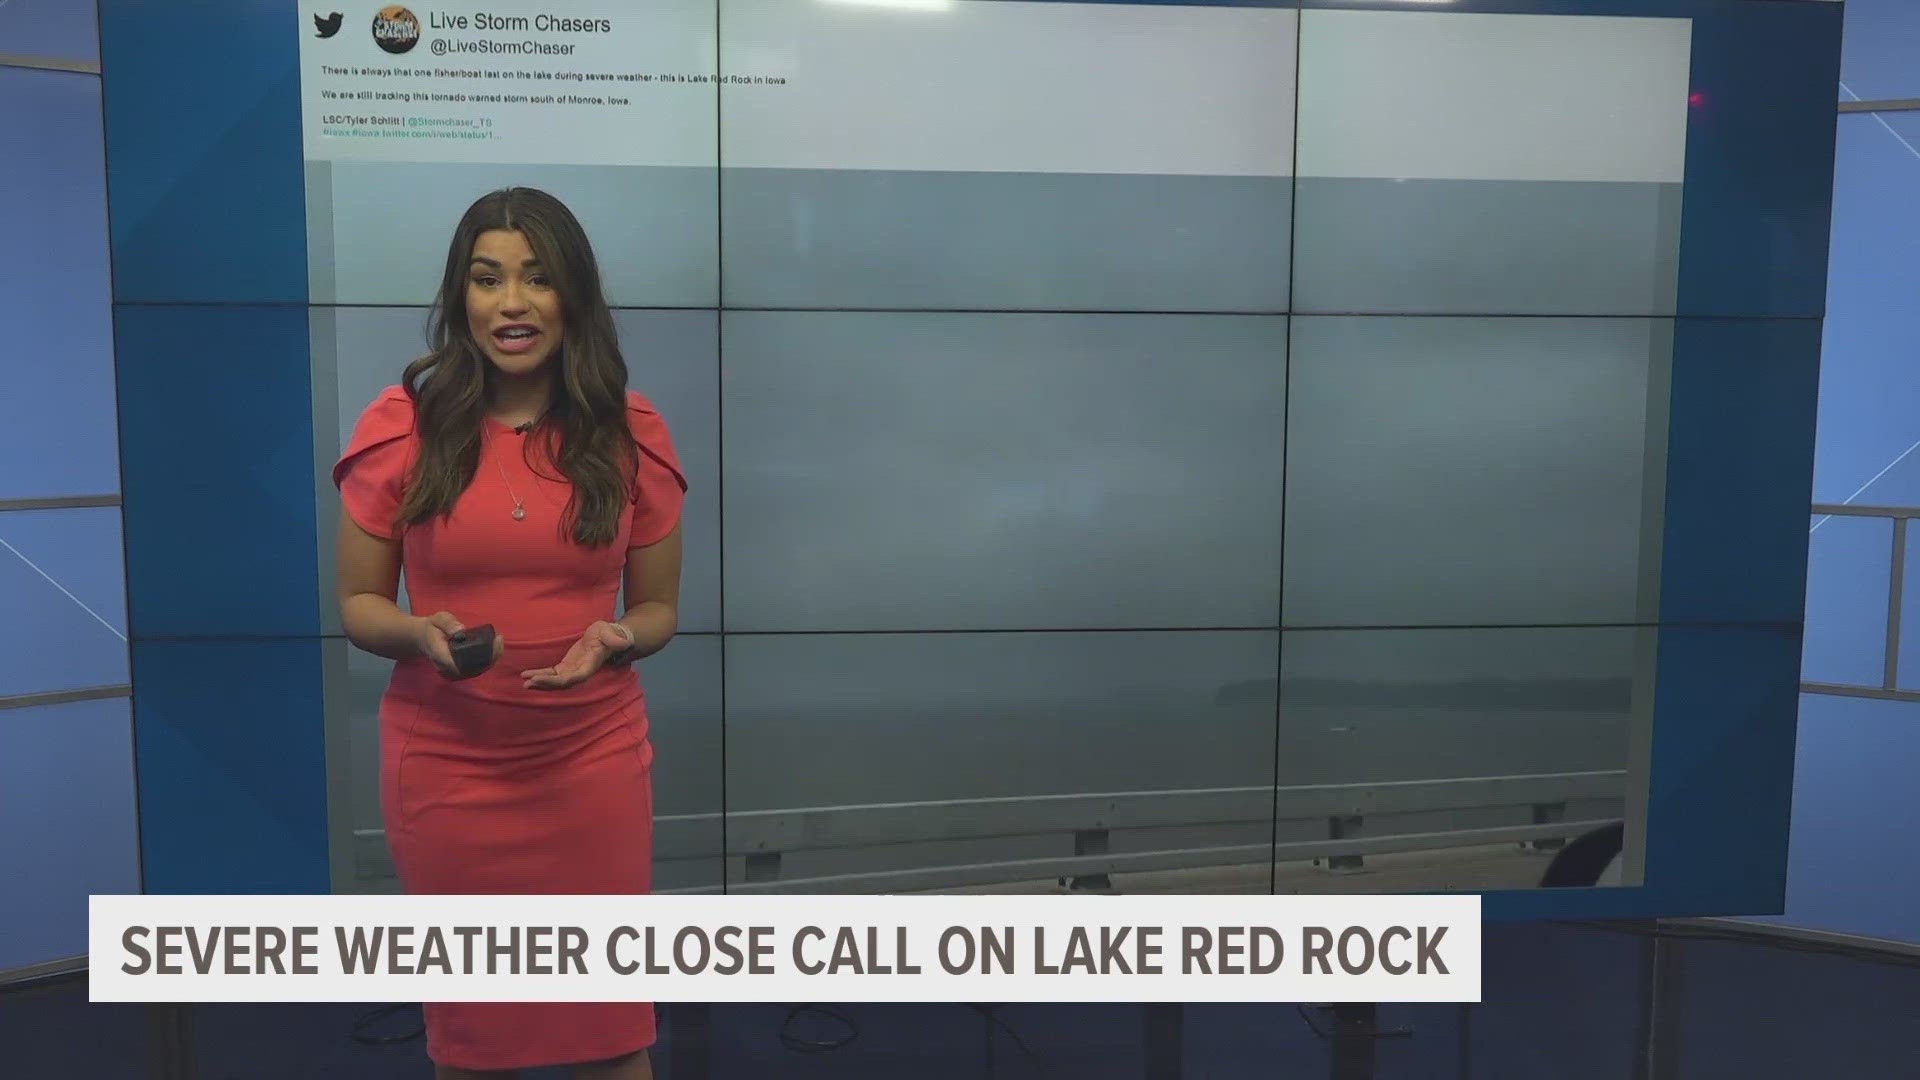 Severe weather tore through Iowa yesterday and, while most sought shelter and paused their plans, one Iowan was stuck on Lake Red Rock in the height of the storms.